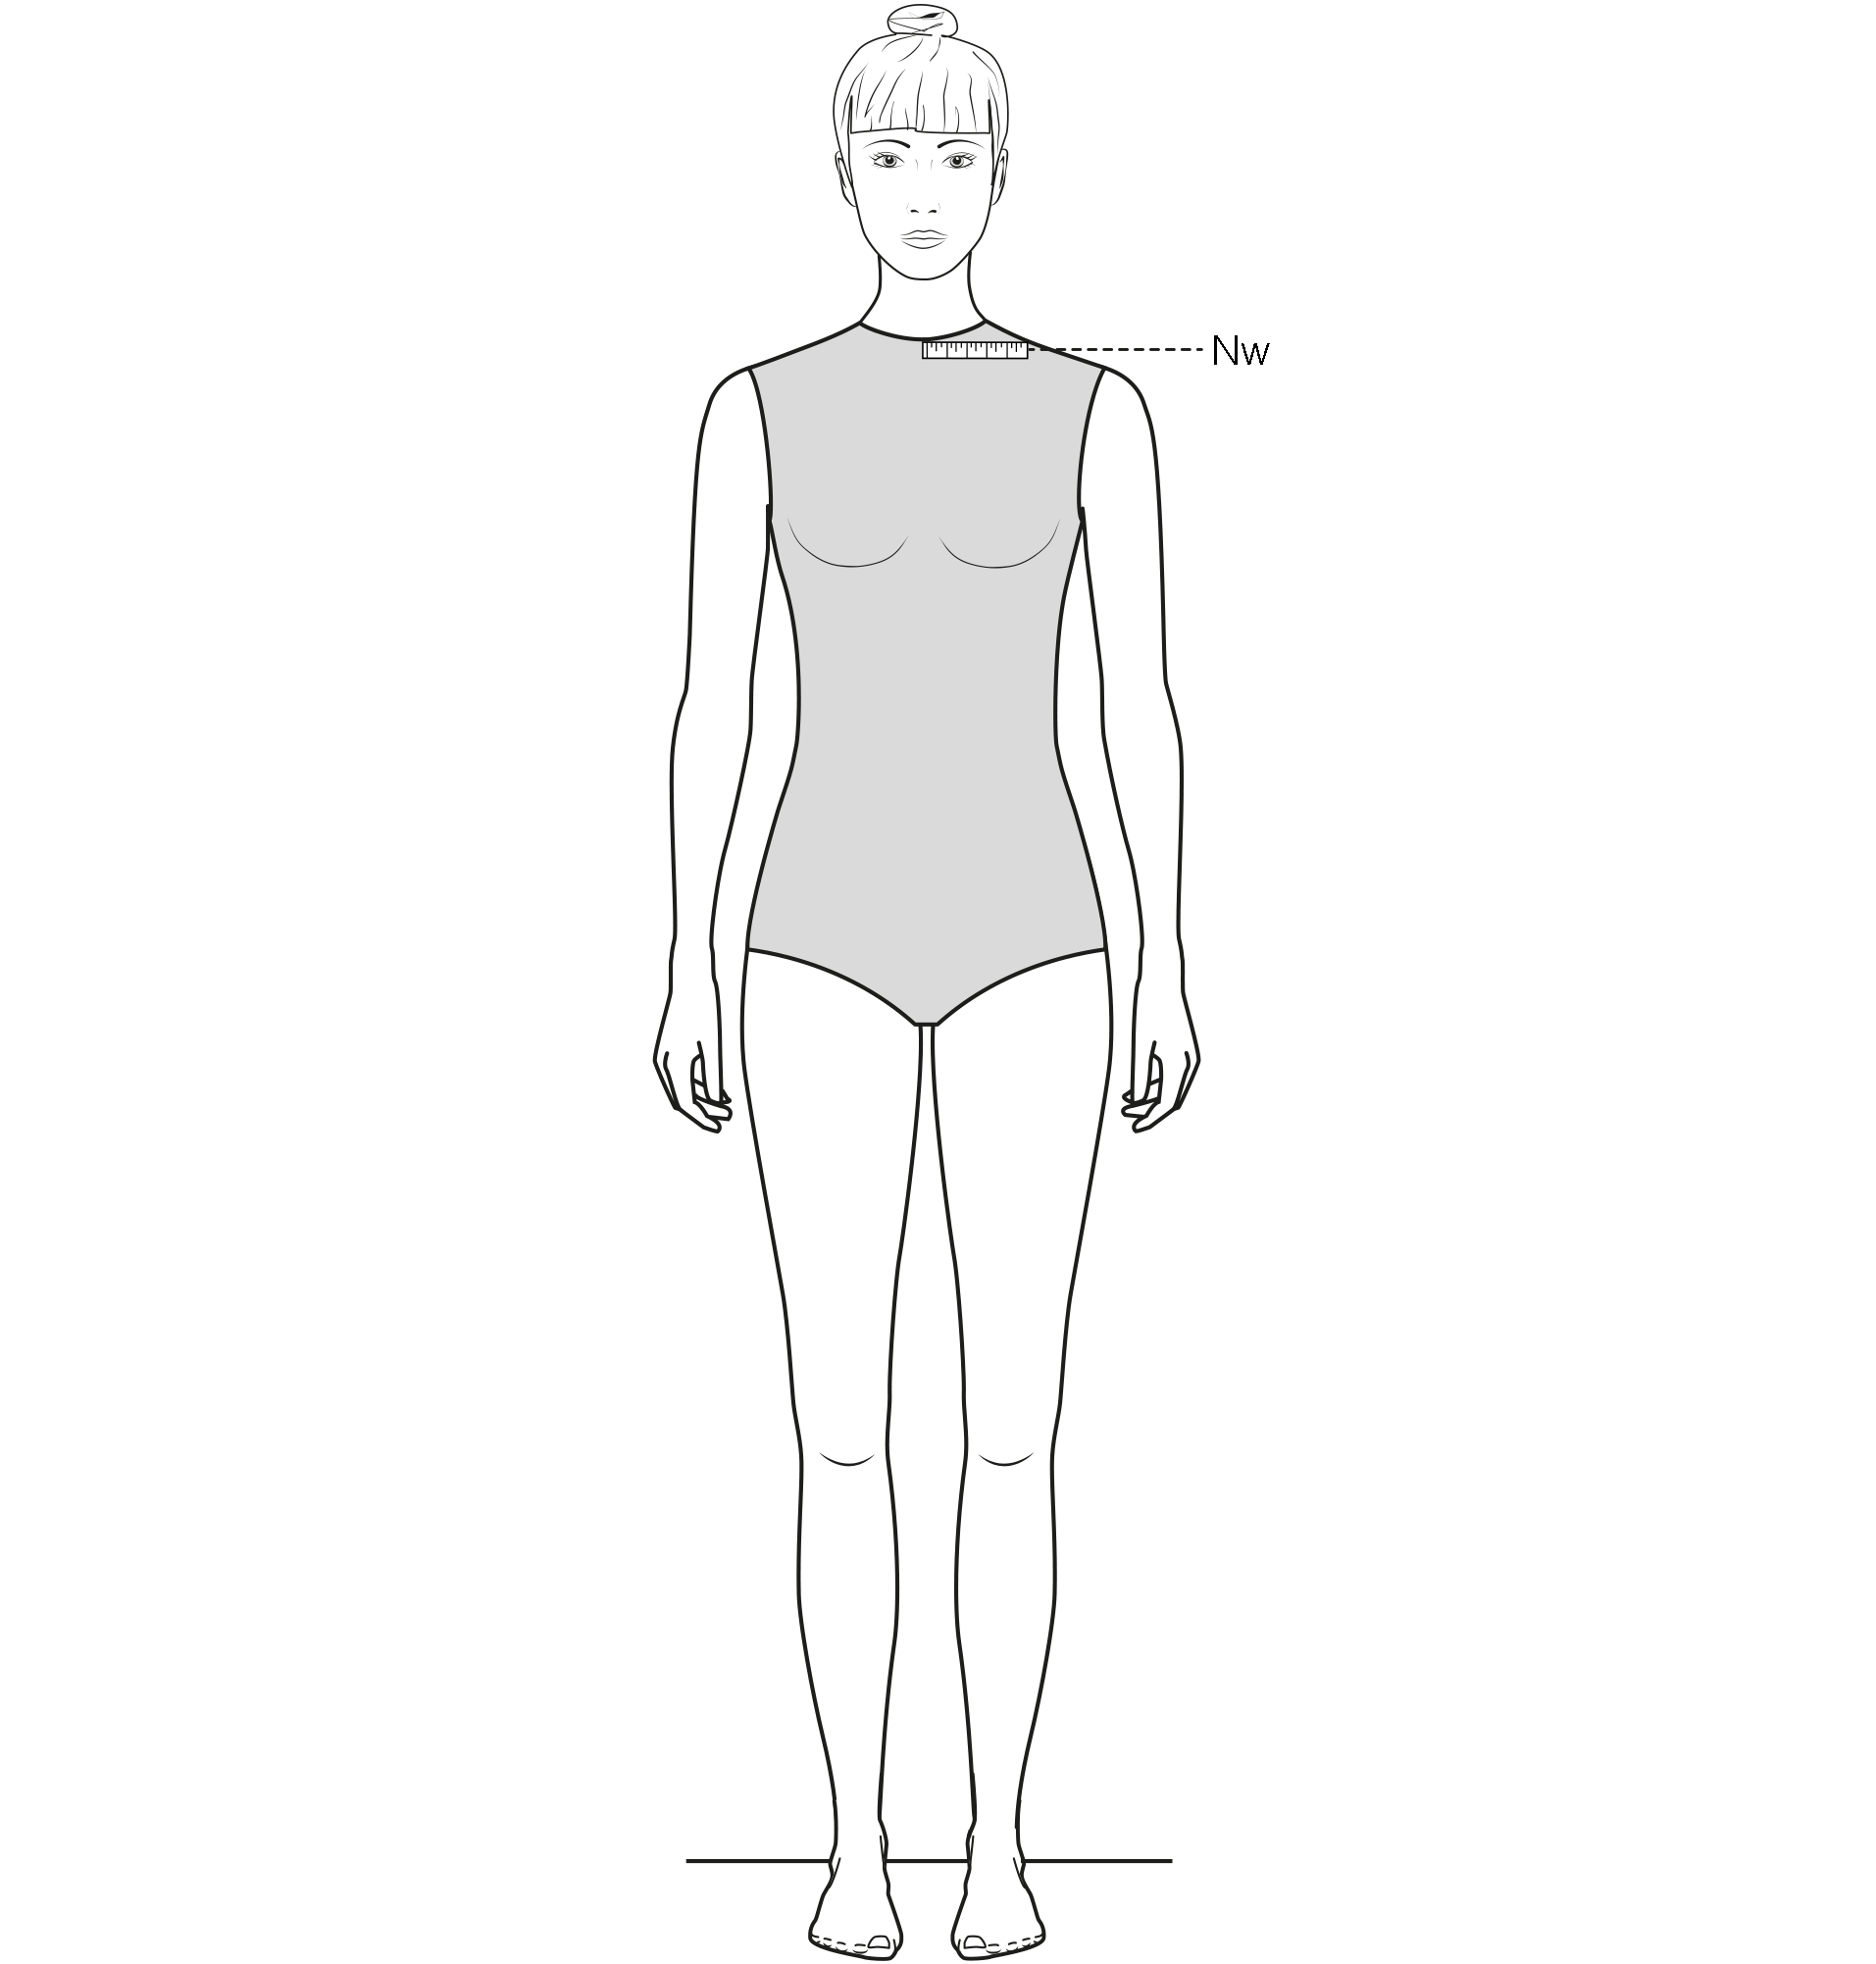 This figure shows the measurement of the Neck width